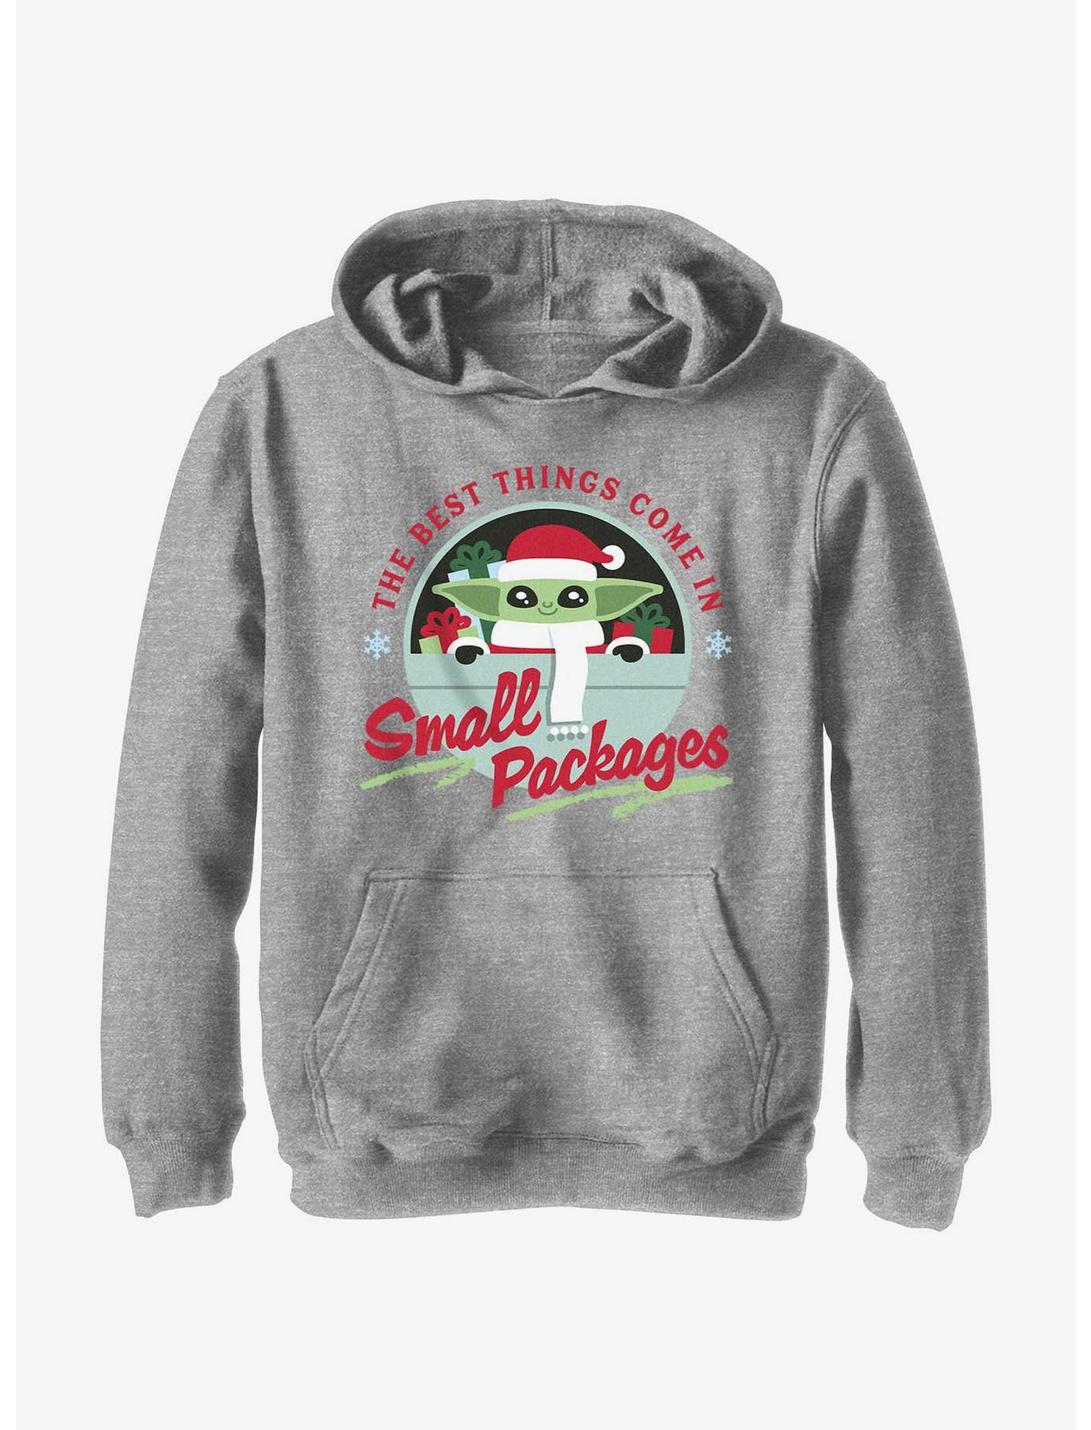 Star Wars The Mandalorian Santa Grogu Small Packages Youth Hoodie, ATH HTR, hi-res